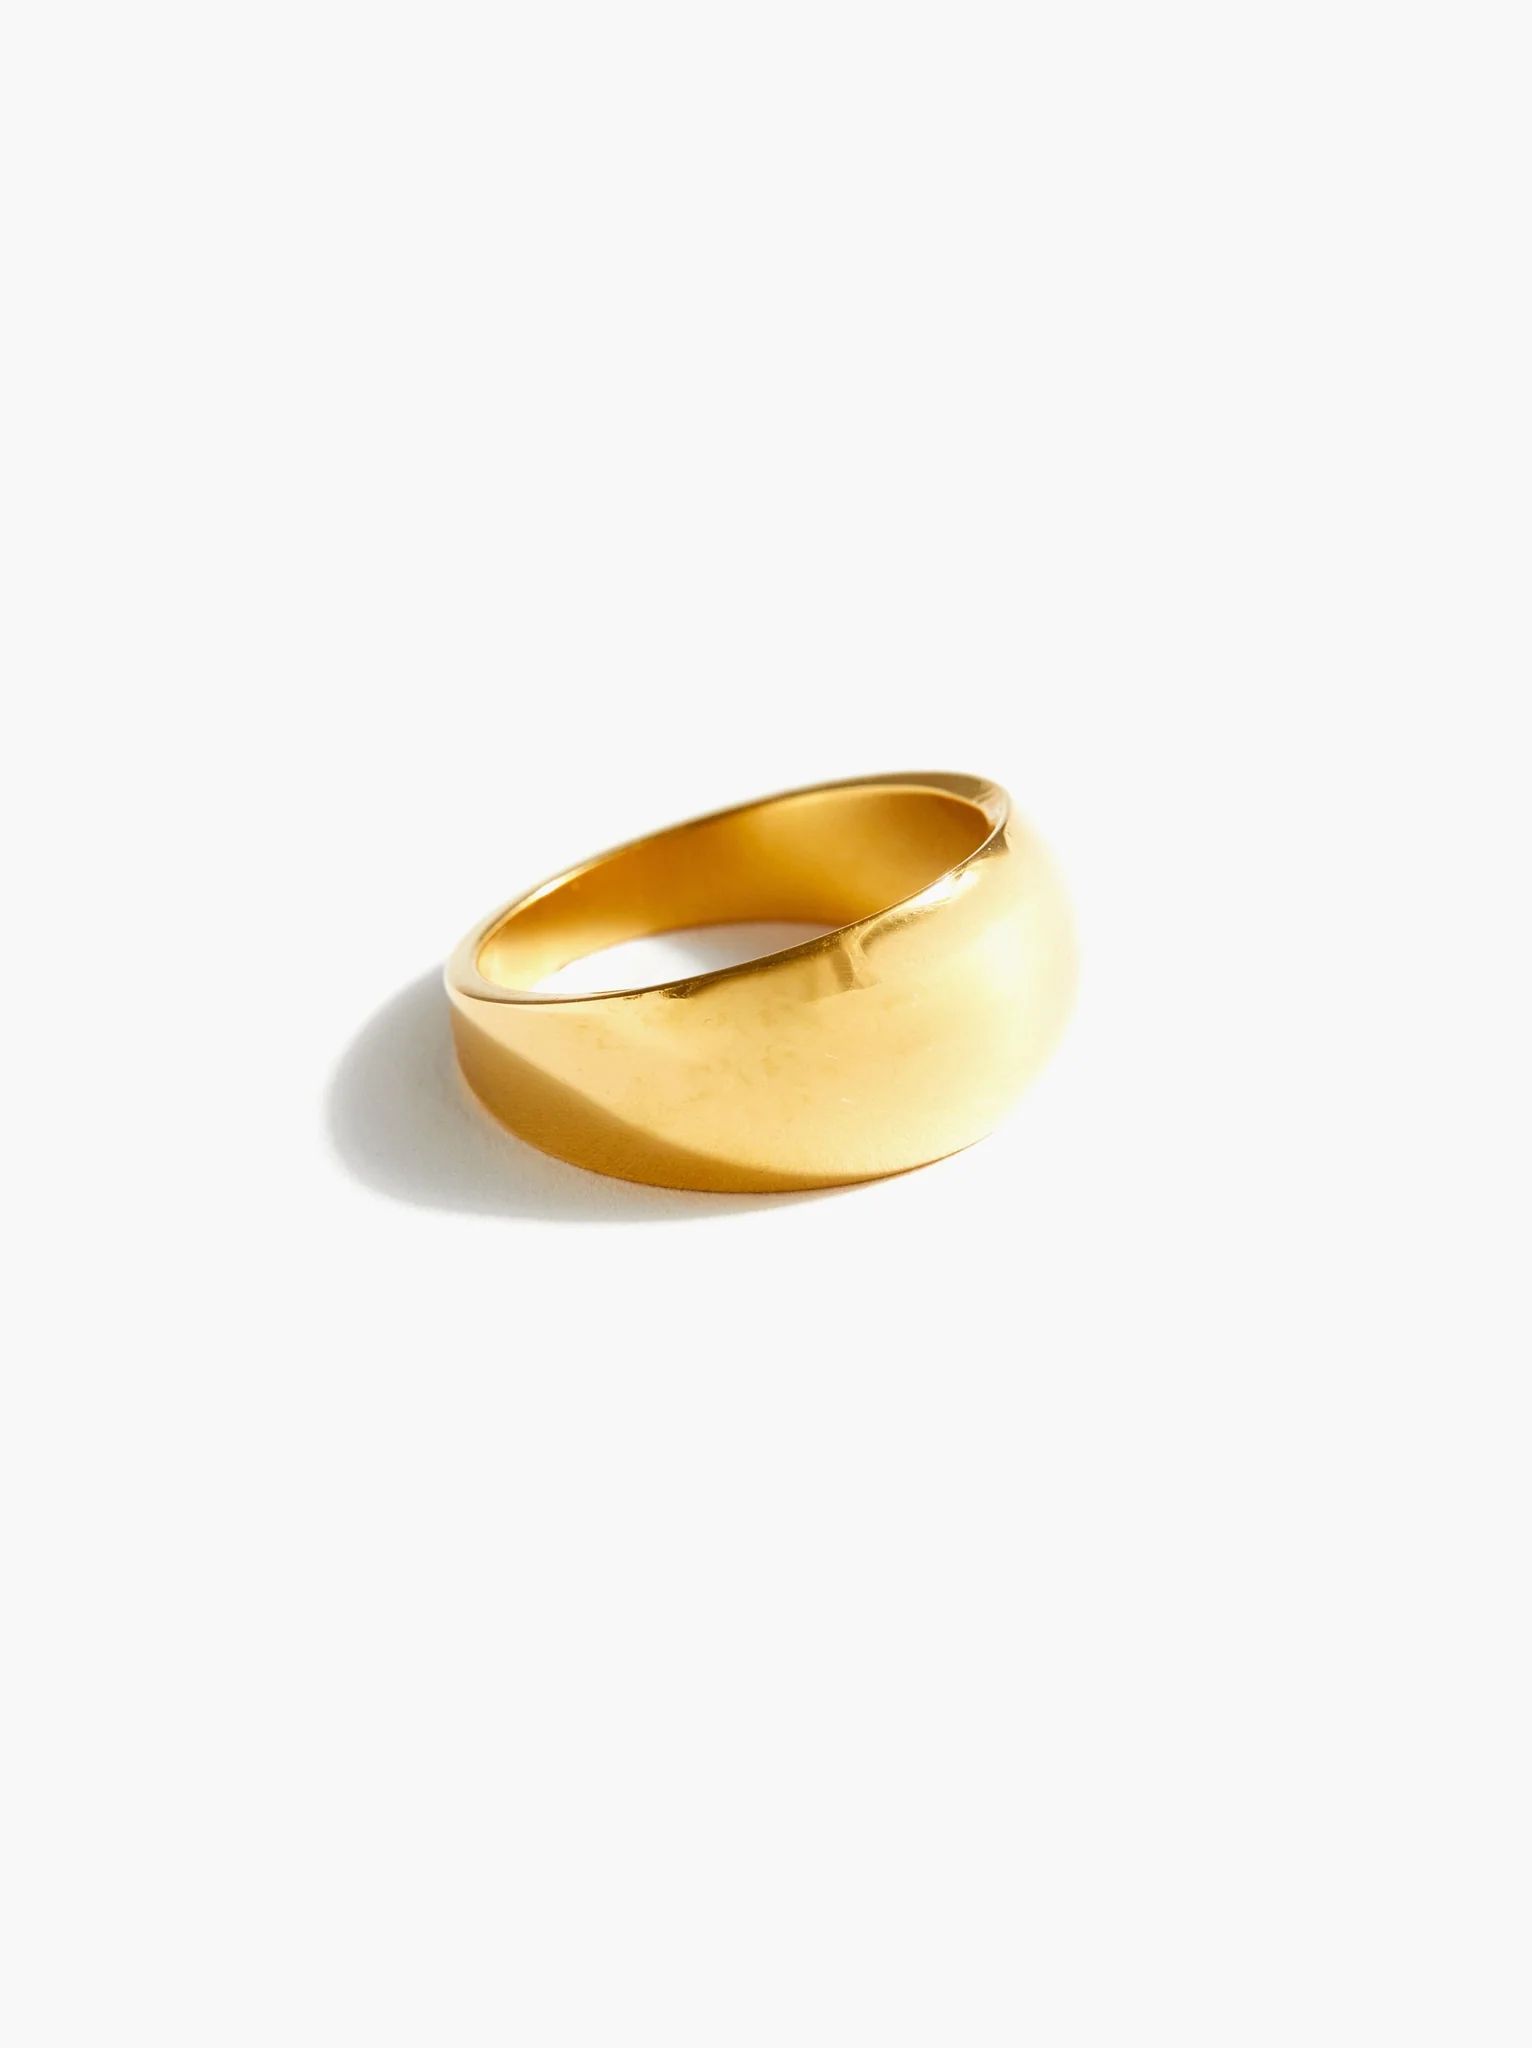 Mod Dome Ring | ABLE